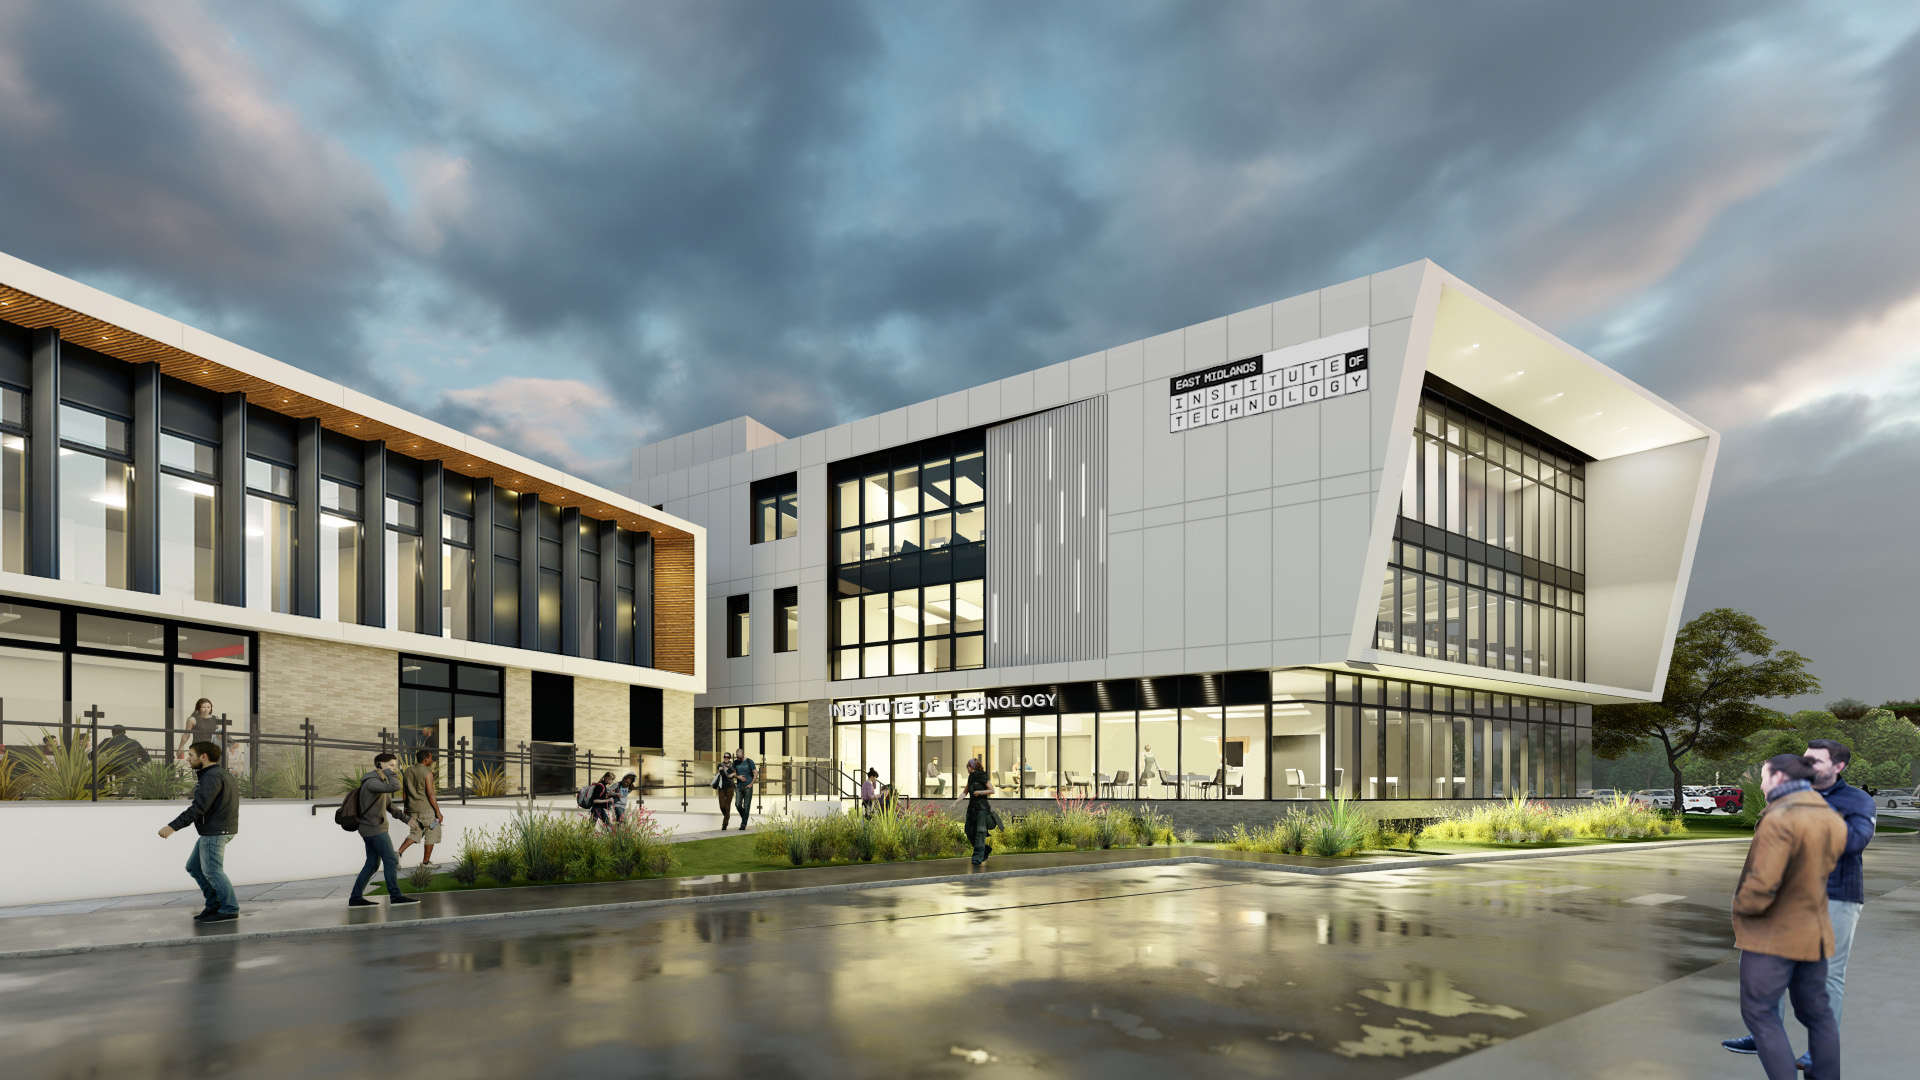 Work starts on Major New UK Tech Learning Hub at Loughborough College